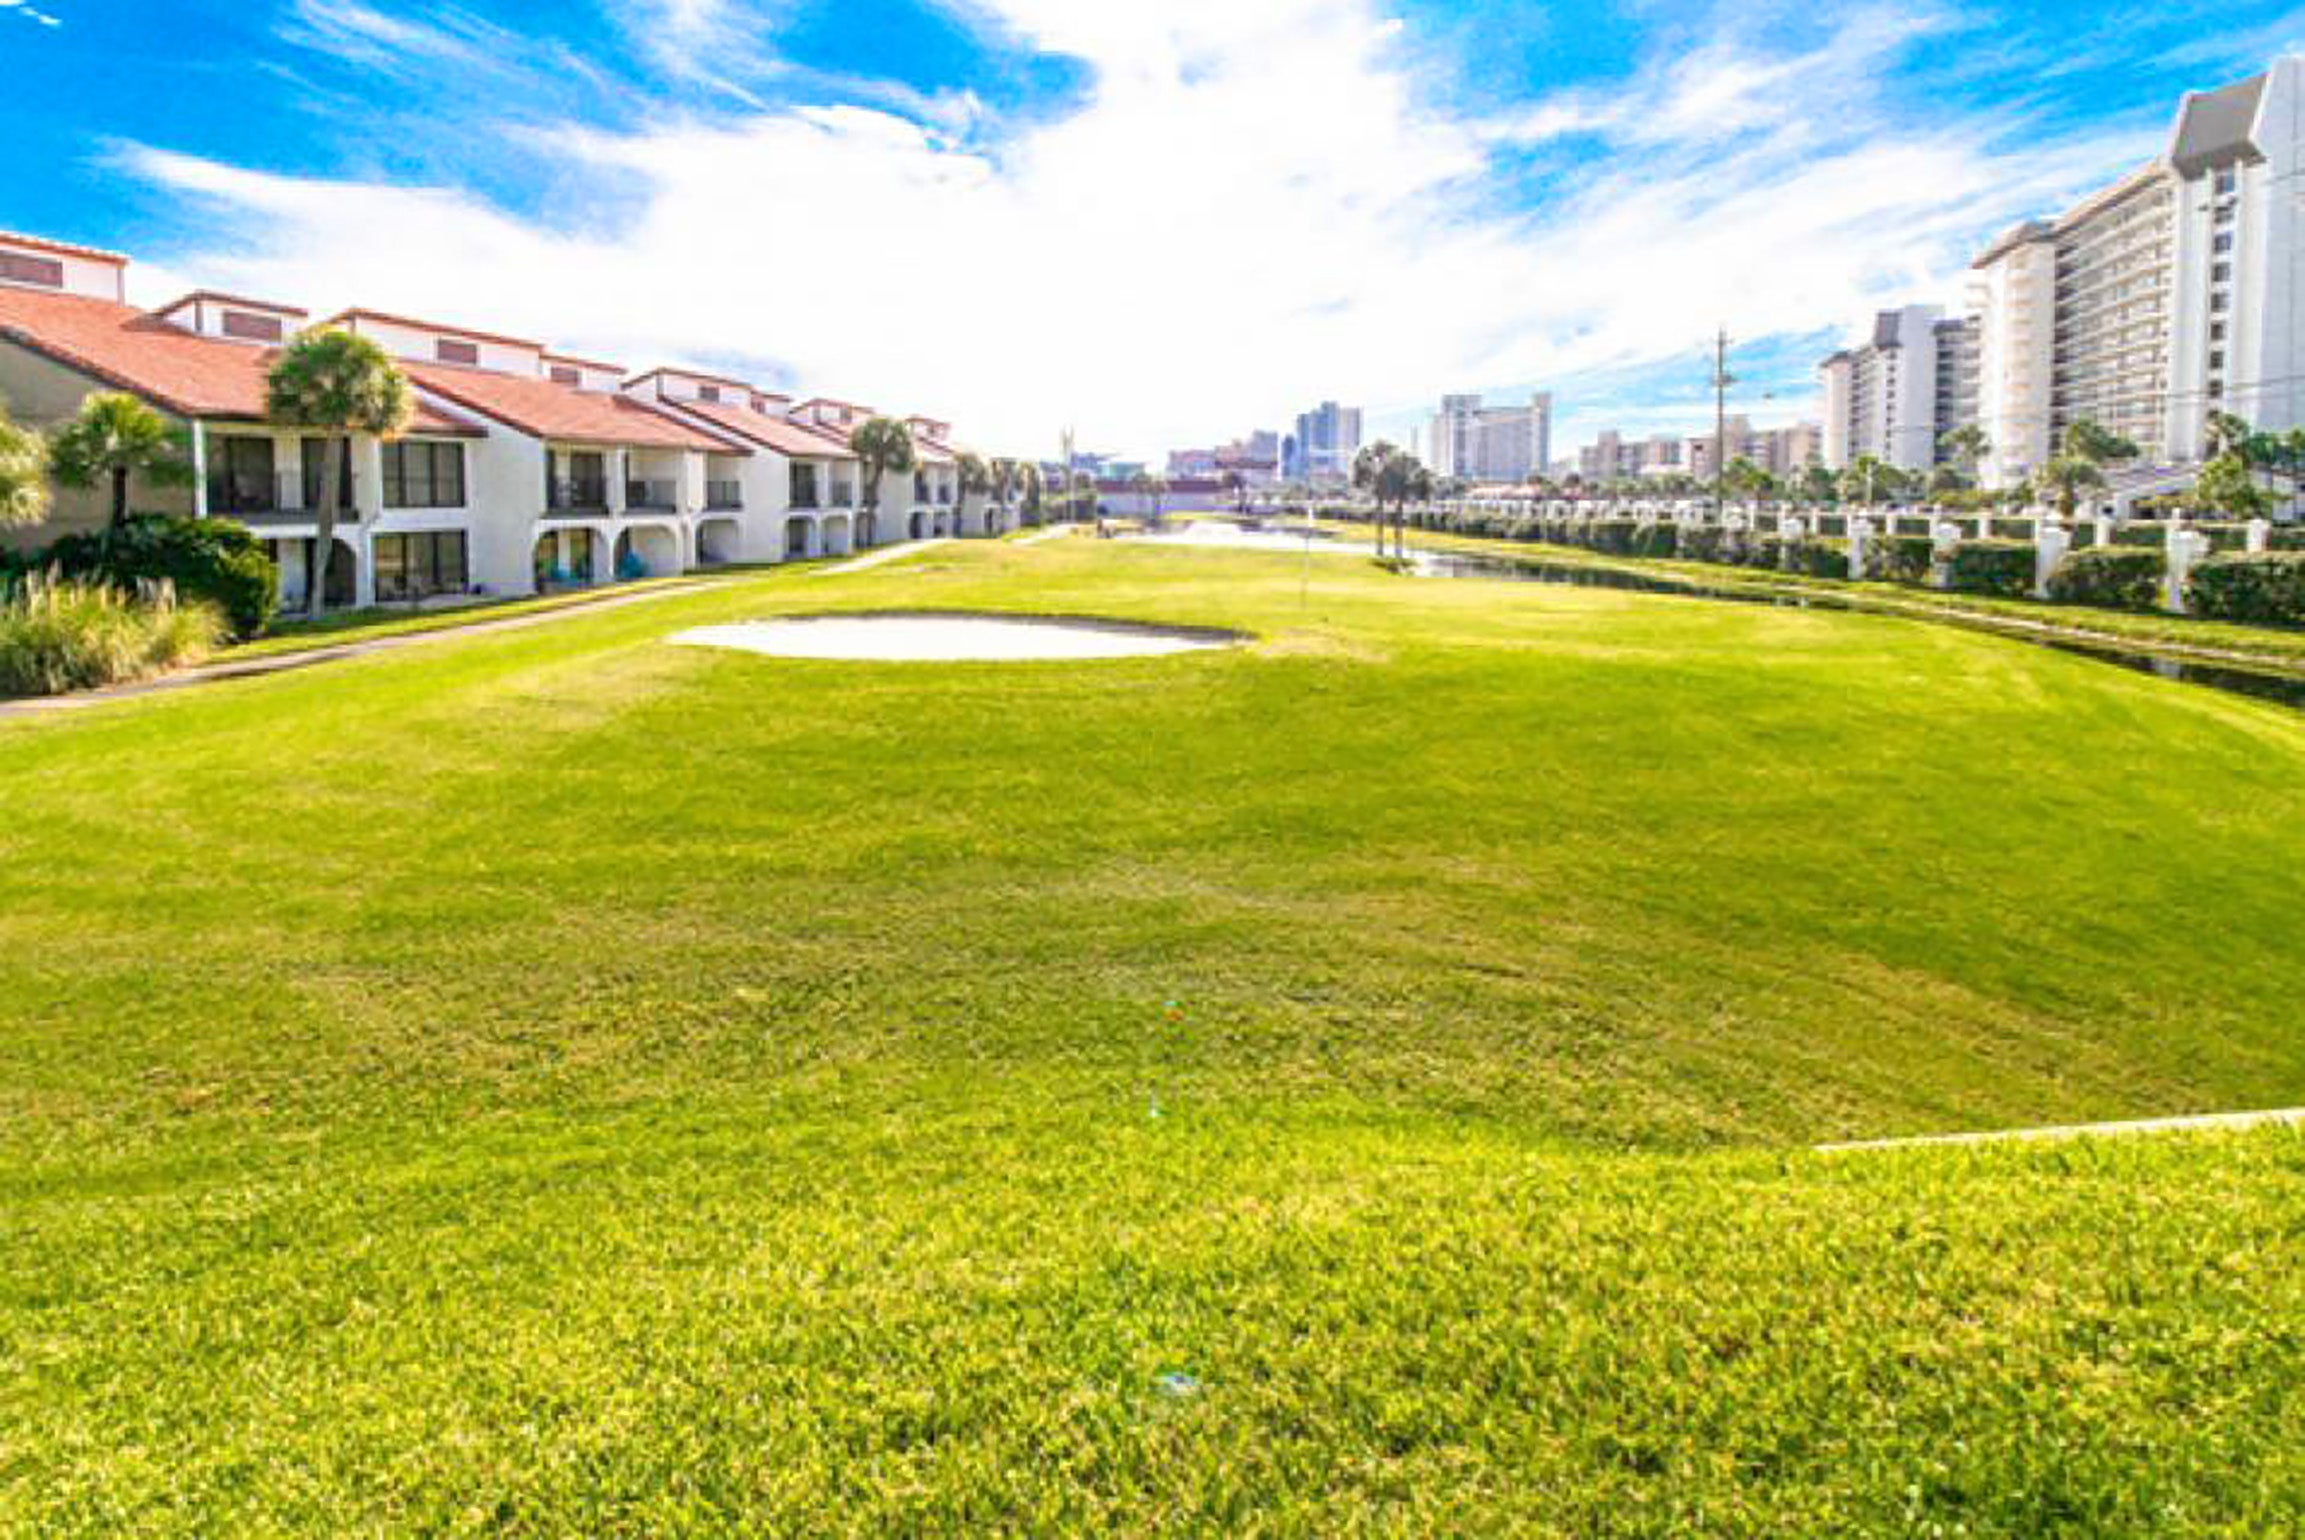 Golf+Course+at+Edgewater+Resort